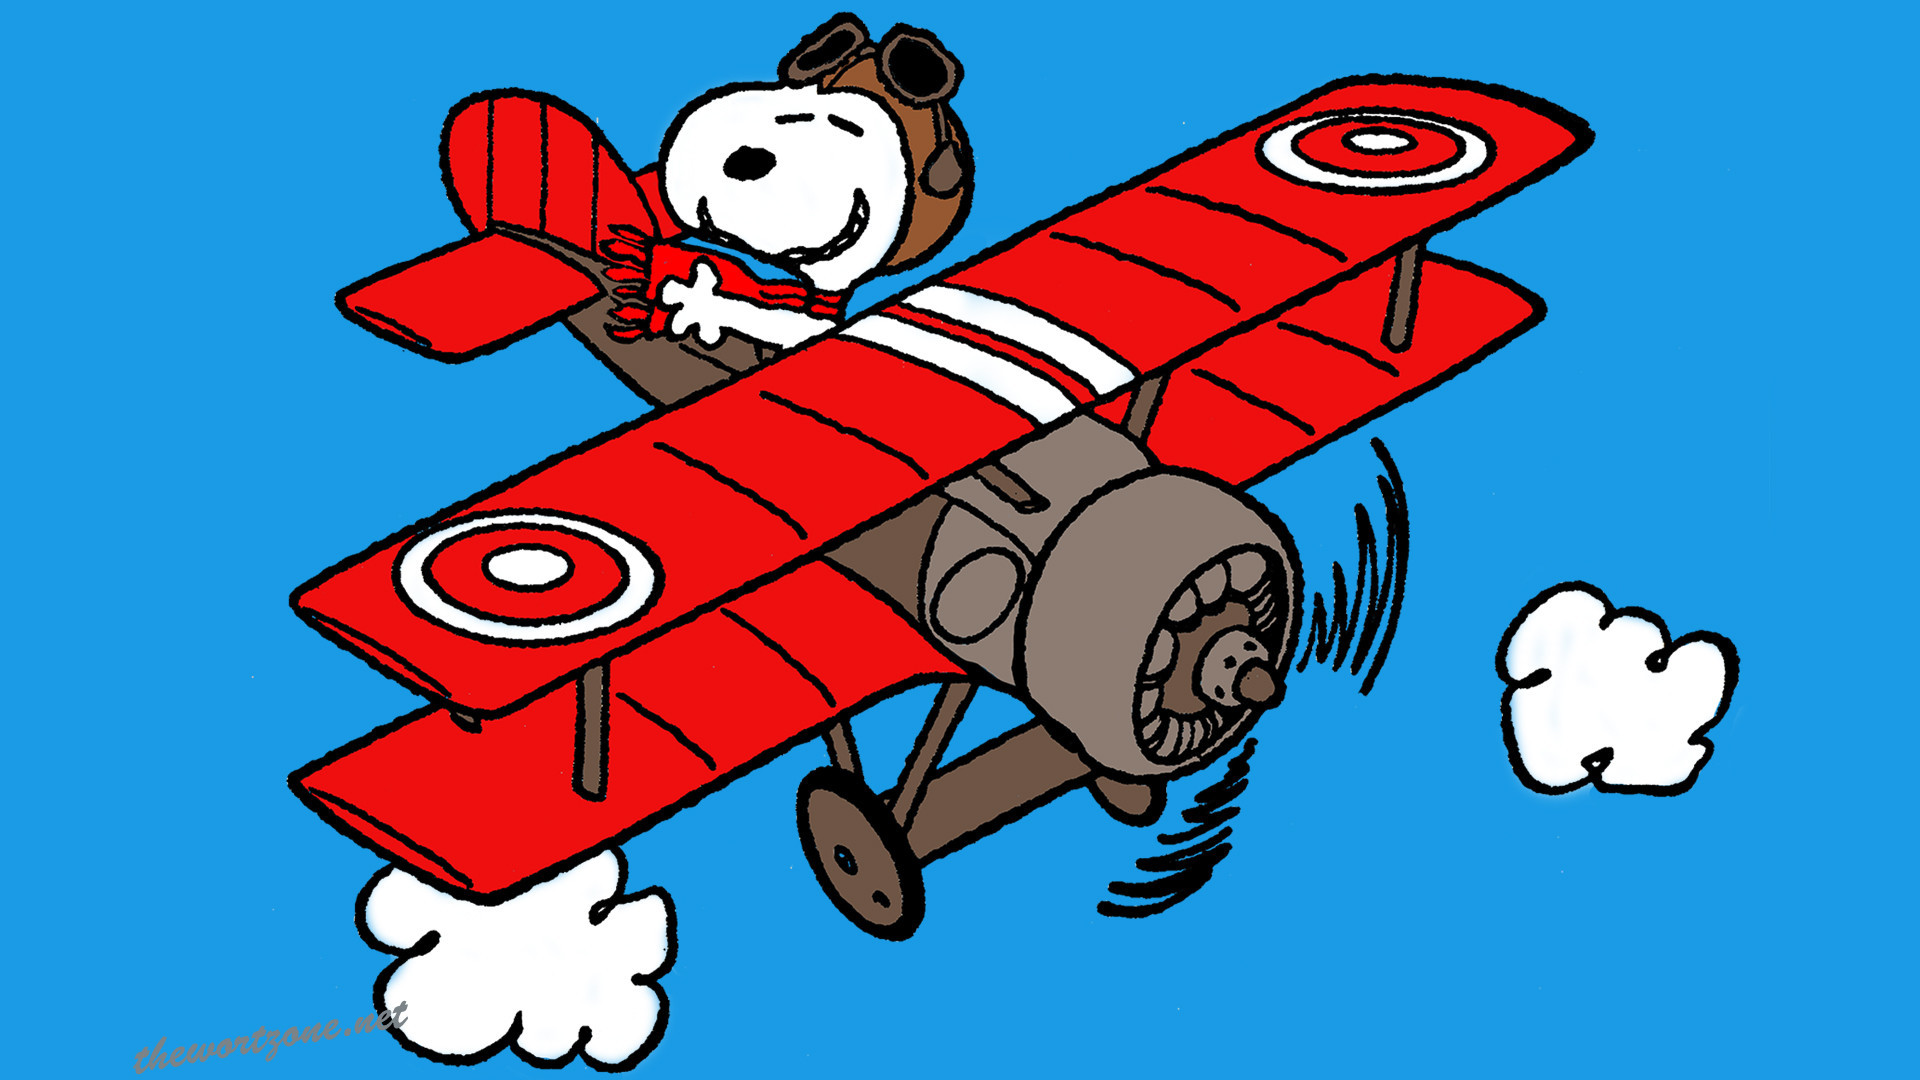 1920x1080 18 HD Snoopy Desktop Wallpapers For Free Download